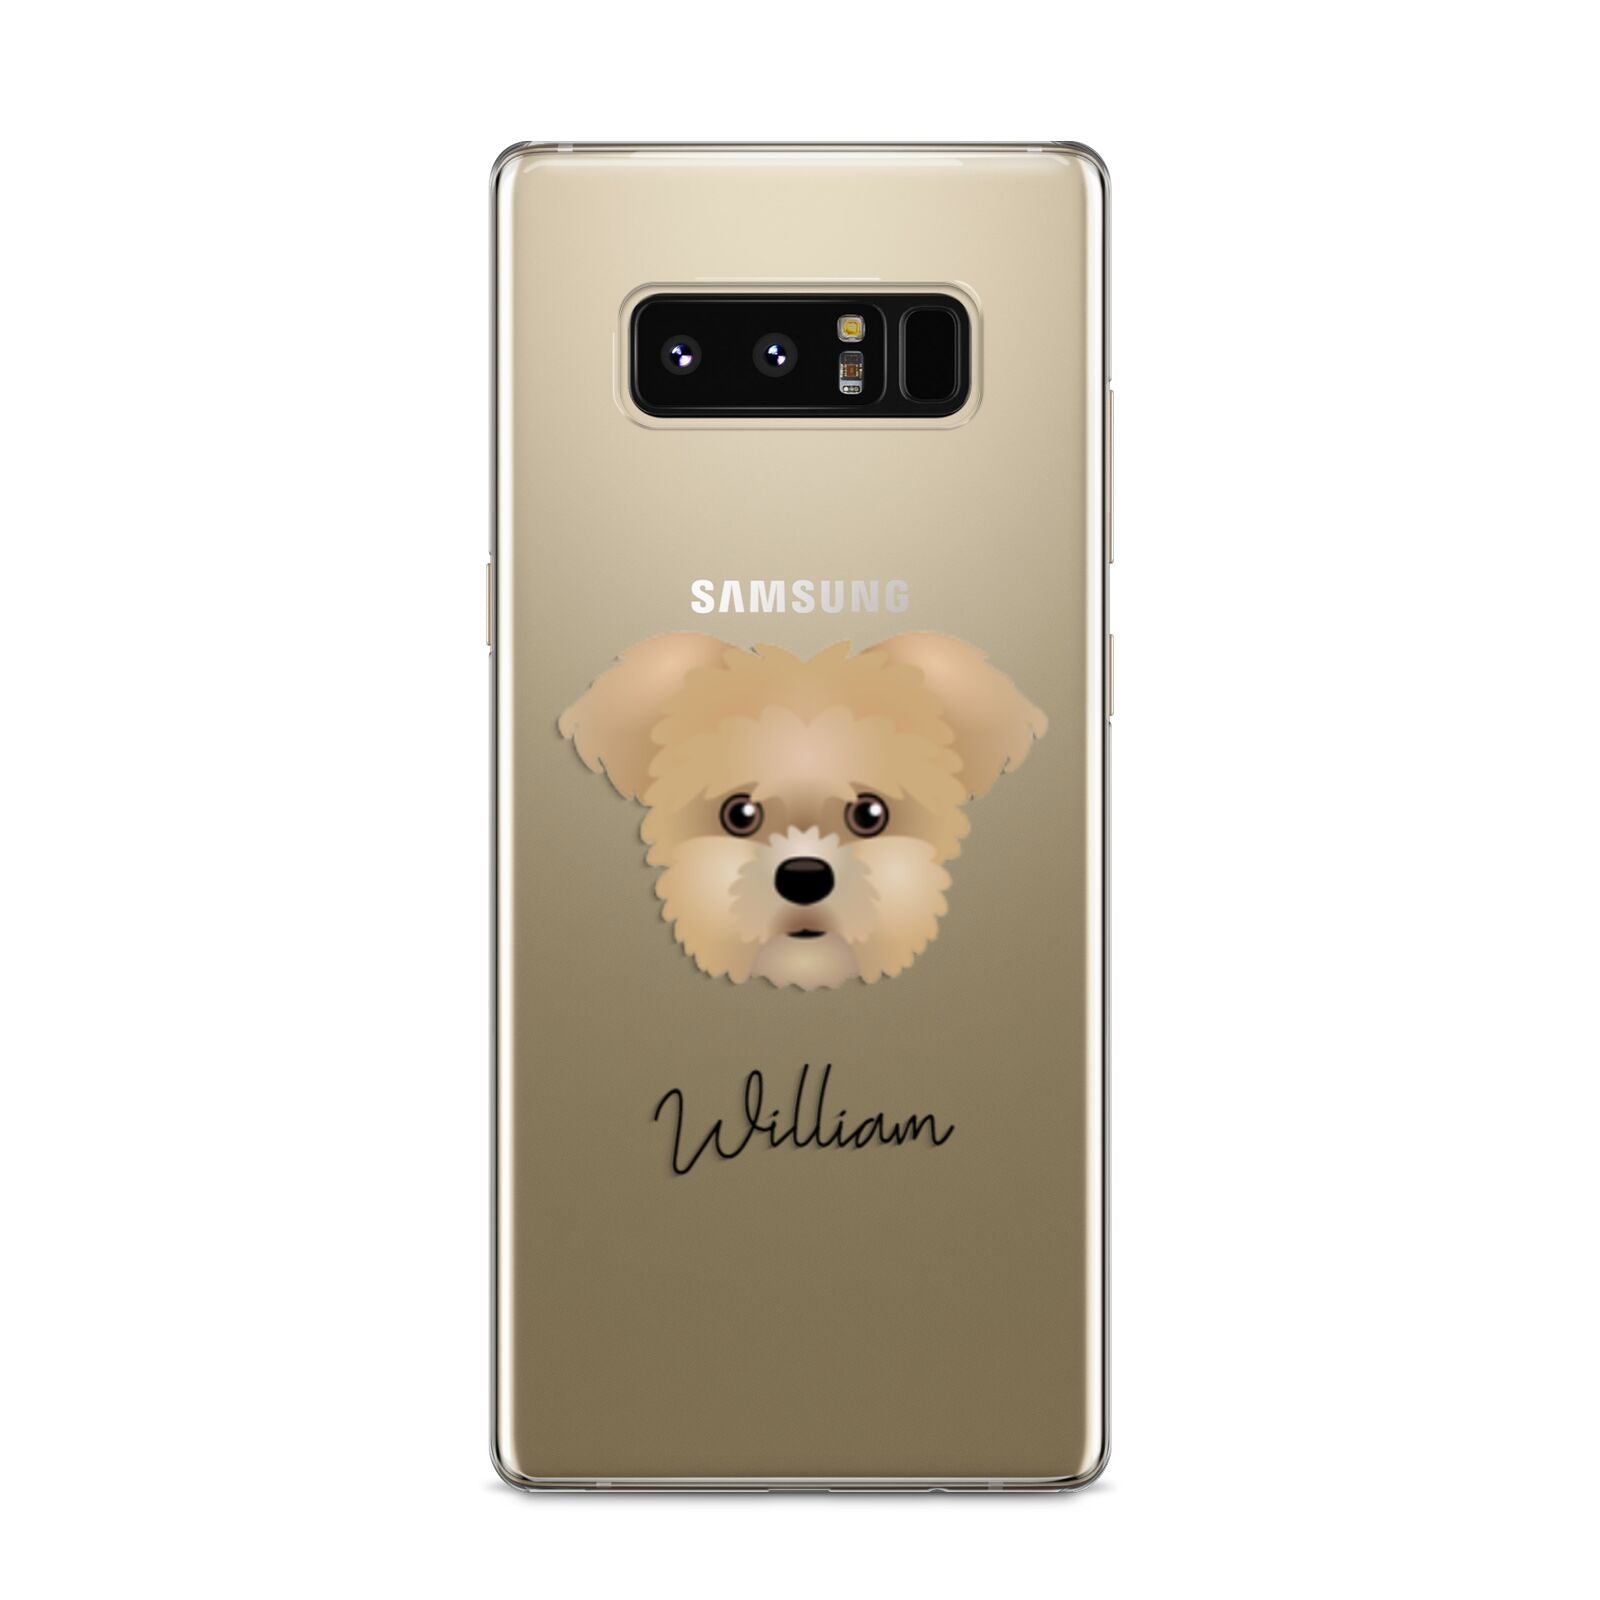 Morkie Personalised Samsung Galaxy S8 Case